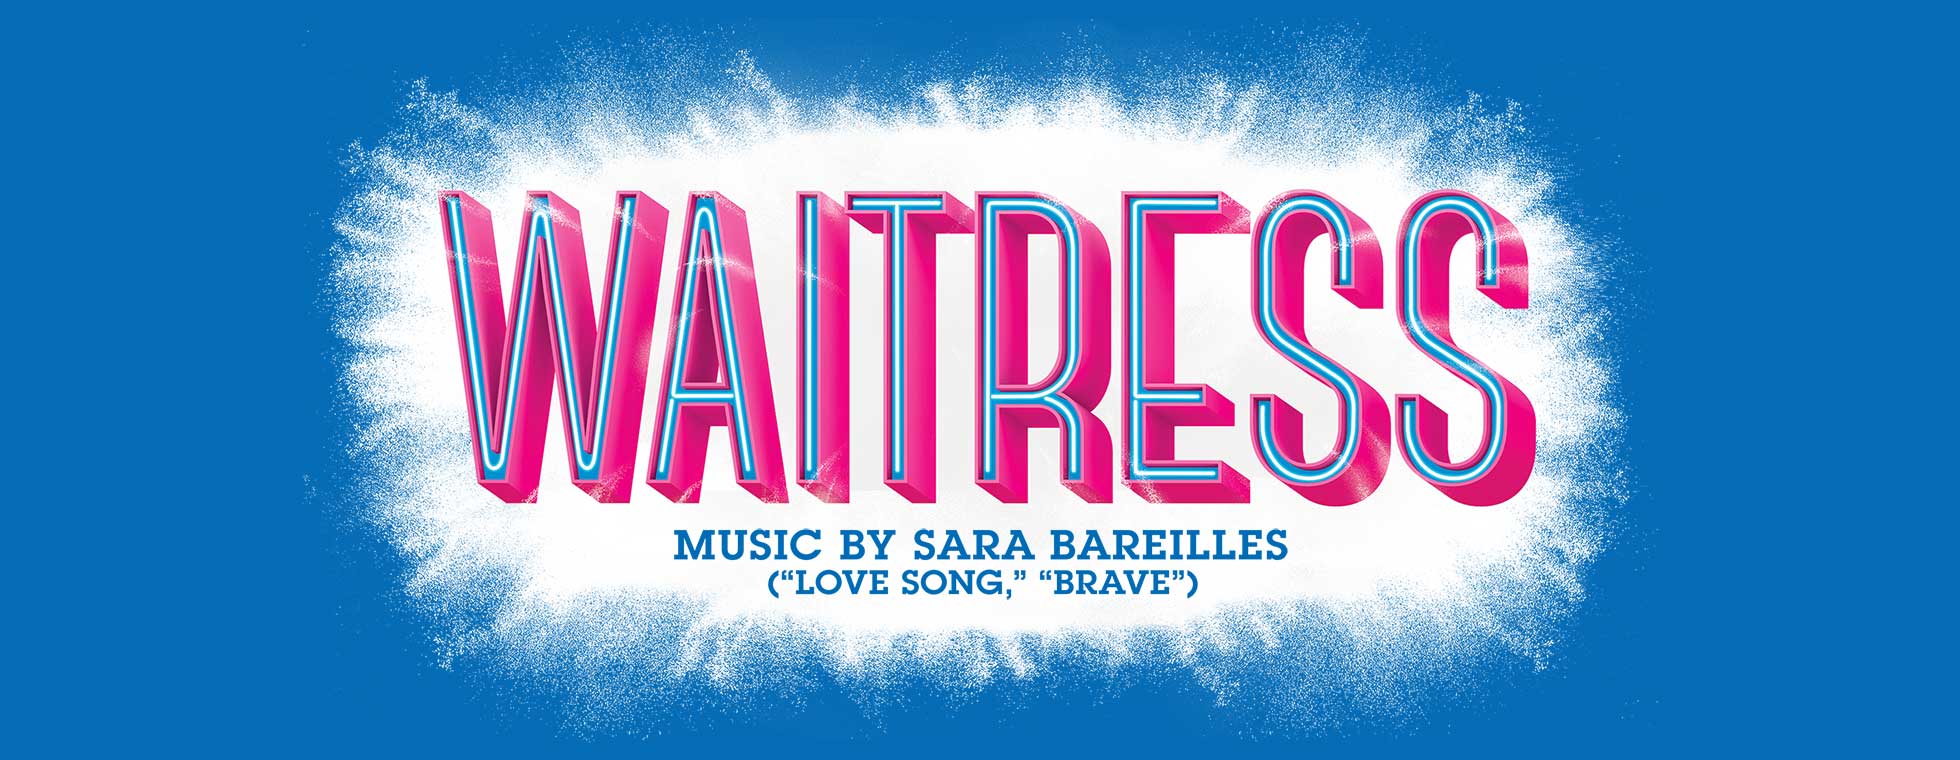 Waitress features music by Sara Bareilles, including “Love Song” and “Brave.”